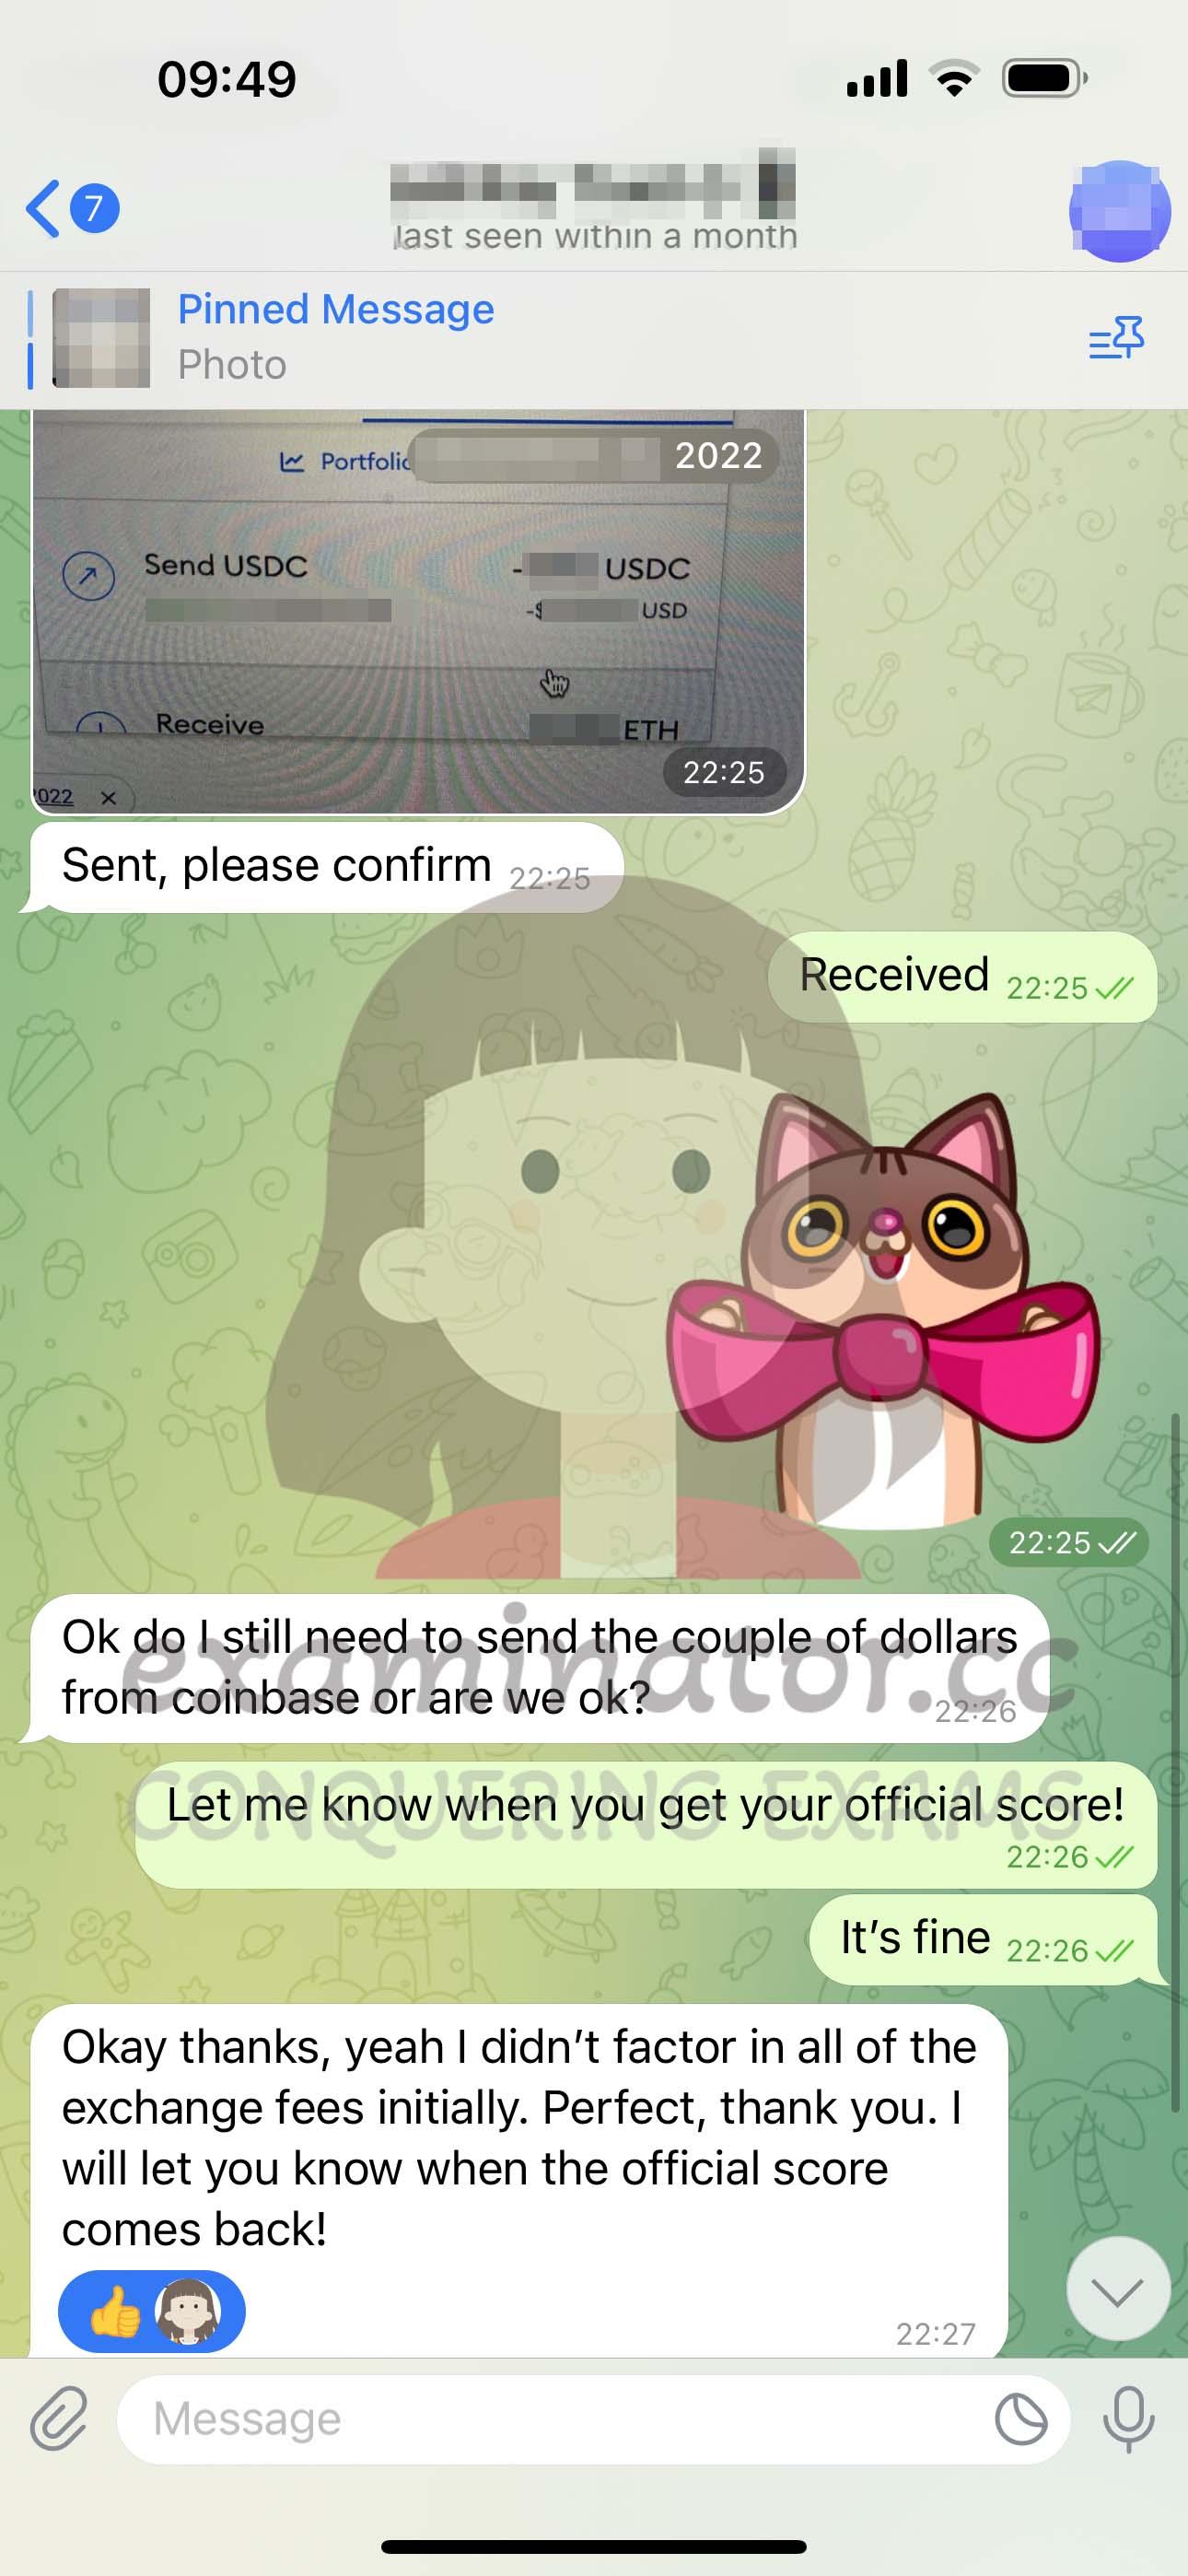 🇺🇸🌴 Why Are Some Official Score Reports Absent? Clients Ghosting Us After Exam Success Like This Guy😤 - Congrats to Our Client from Sunny Florida on Receiving Official GRE Scores More Than 6 MONTHS After Test, Thanks to Our Proxy Testing Help, Which They Unfortunately Refused to Share🫠🌟(Also Shows Long Validity of Scores😎)